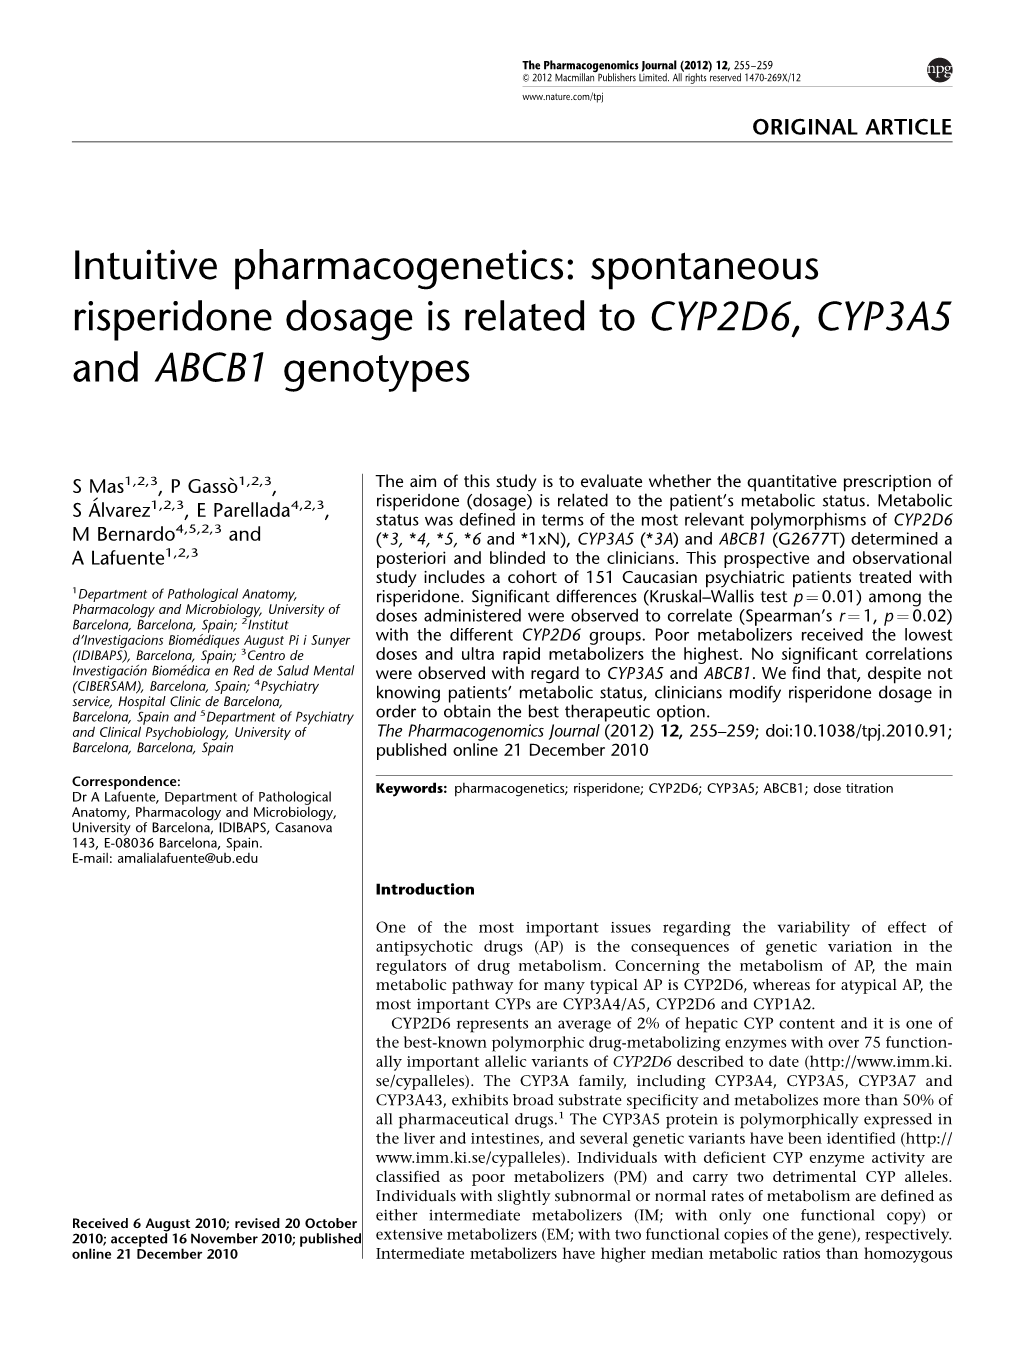 Spontaneous Risperidone Dosage Is Related to CYP2D6, CYP3A5 and ABCB1 Genotypes